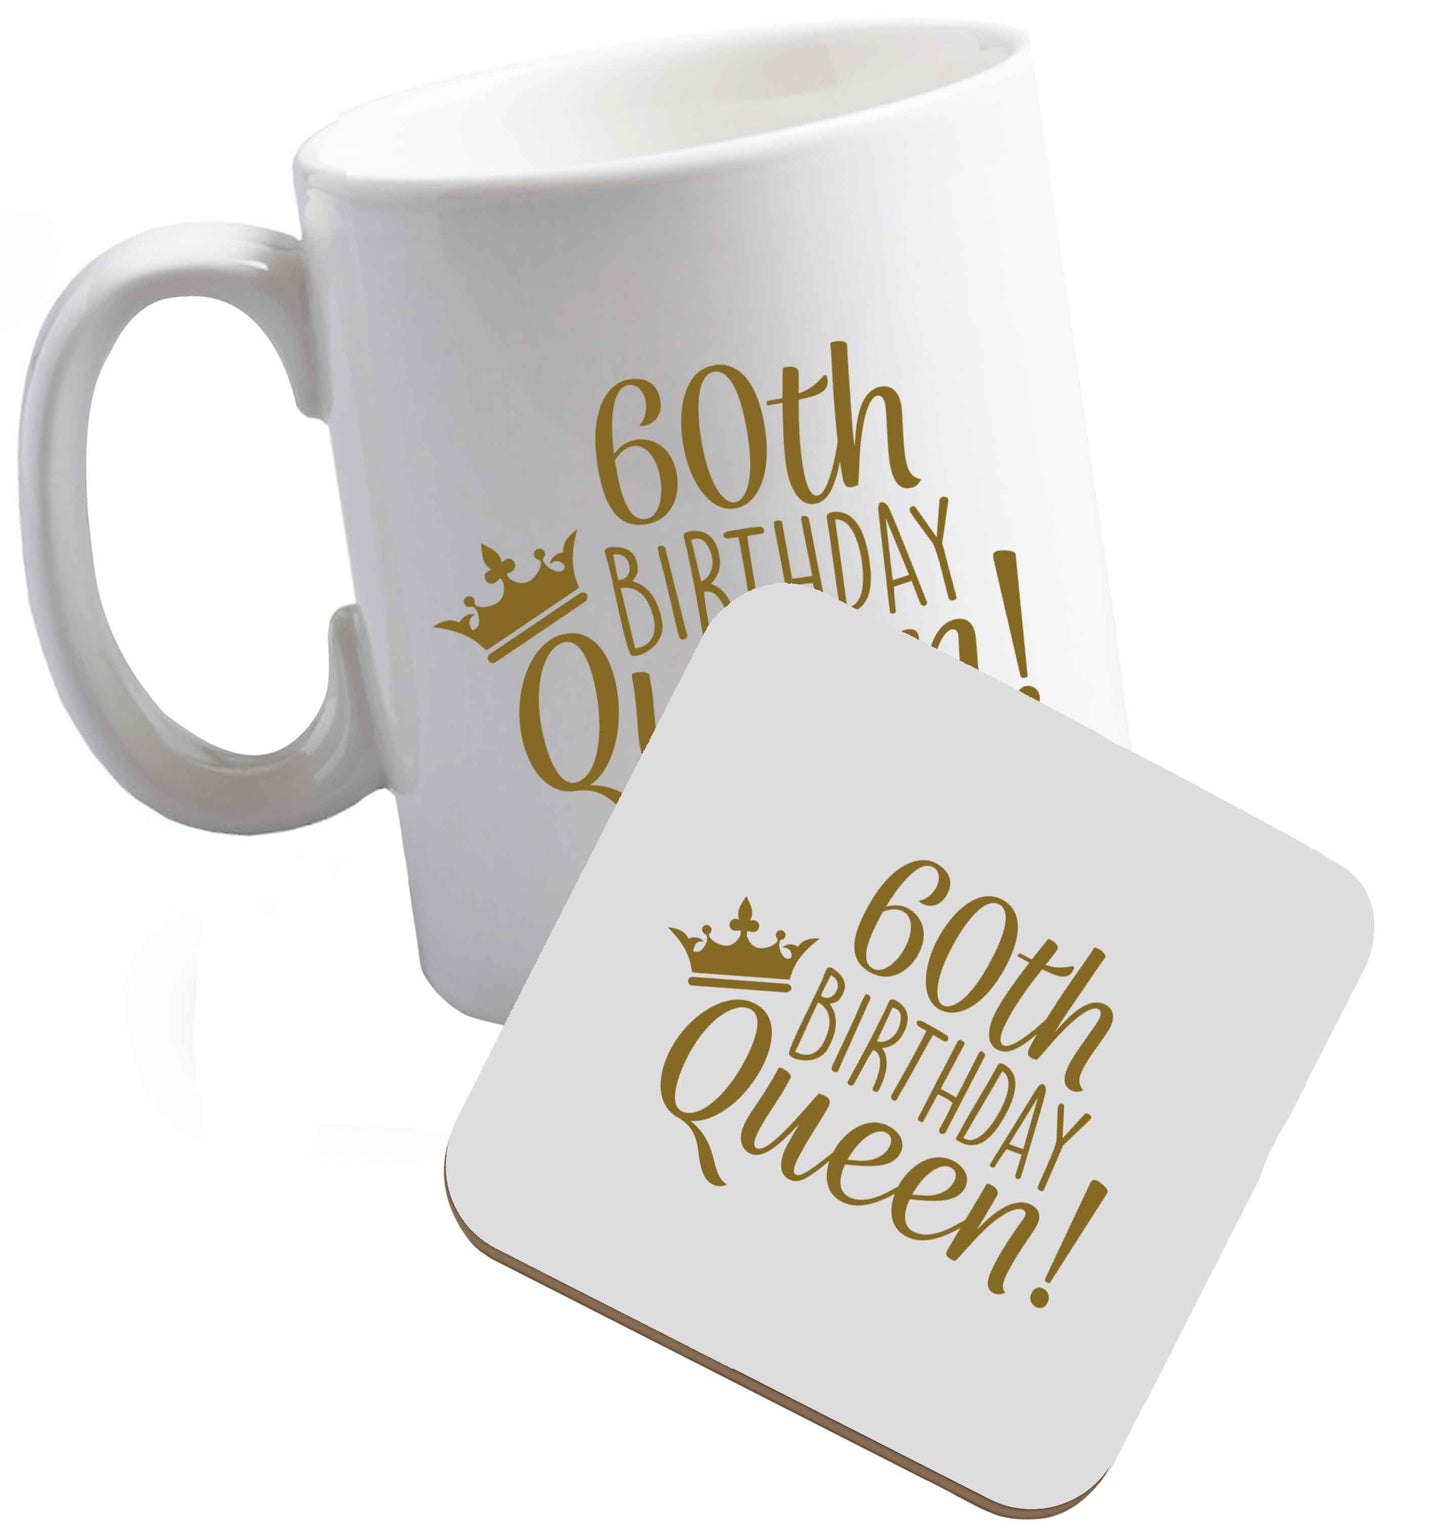 10 oz 60th birthday Queen ceramic mug and coaster set right handed